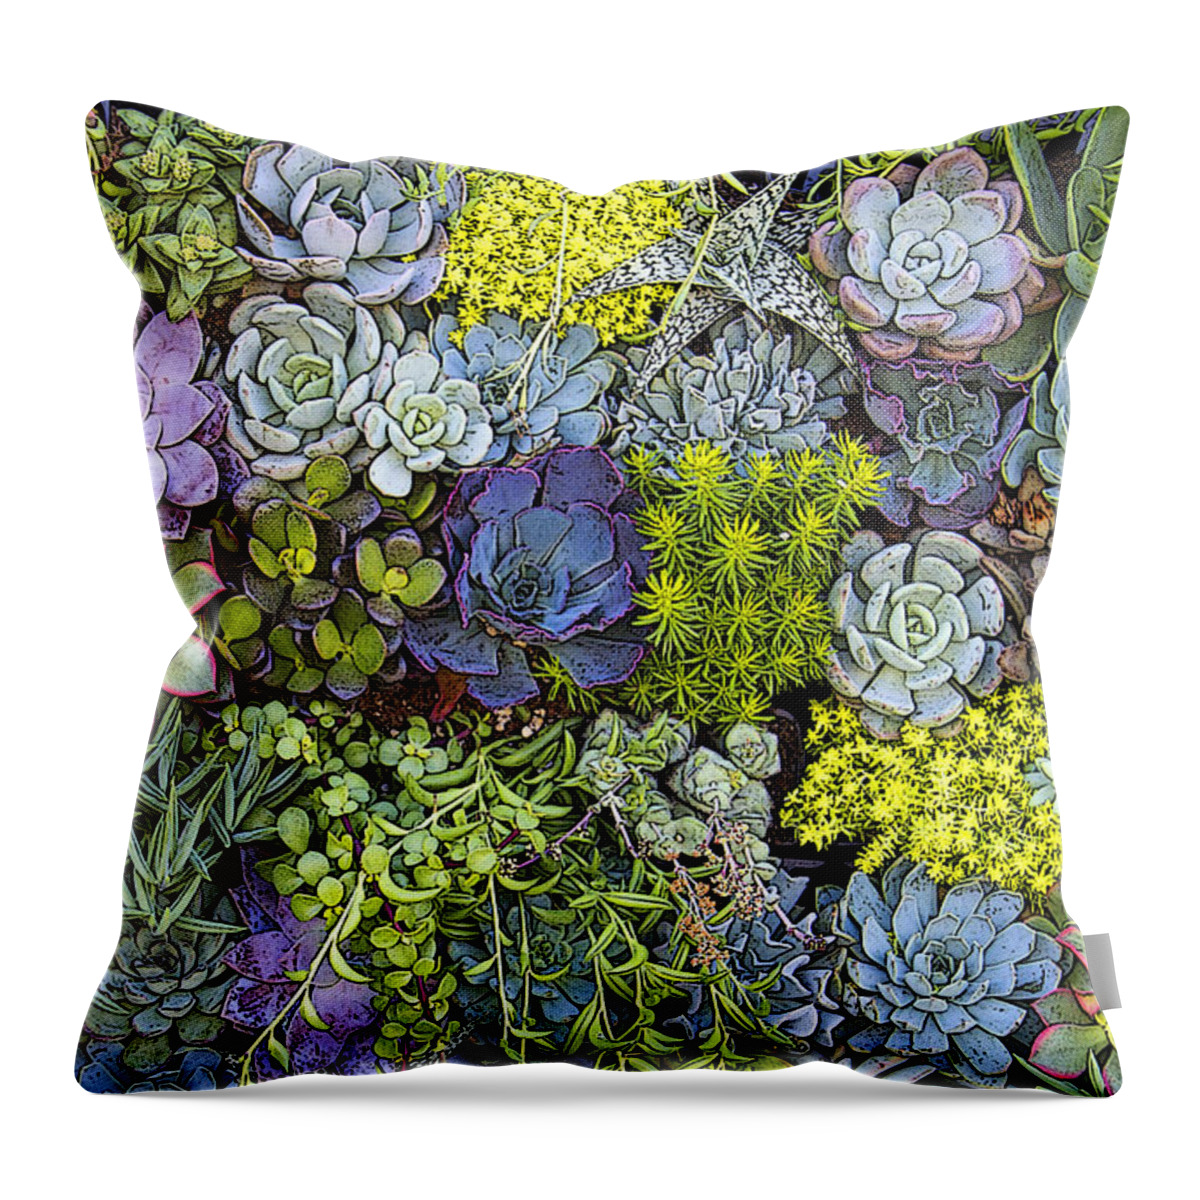 Succulent Throw Pillow featuring the photograph Succulent Wall by Andre Aleksis